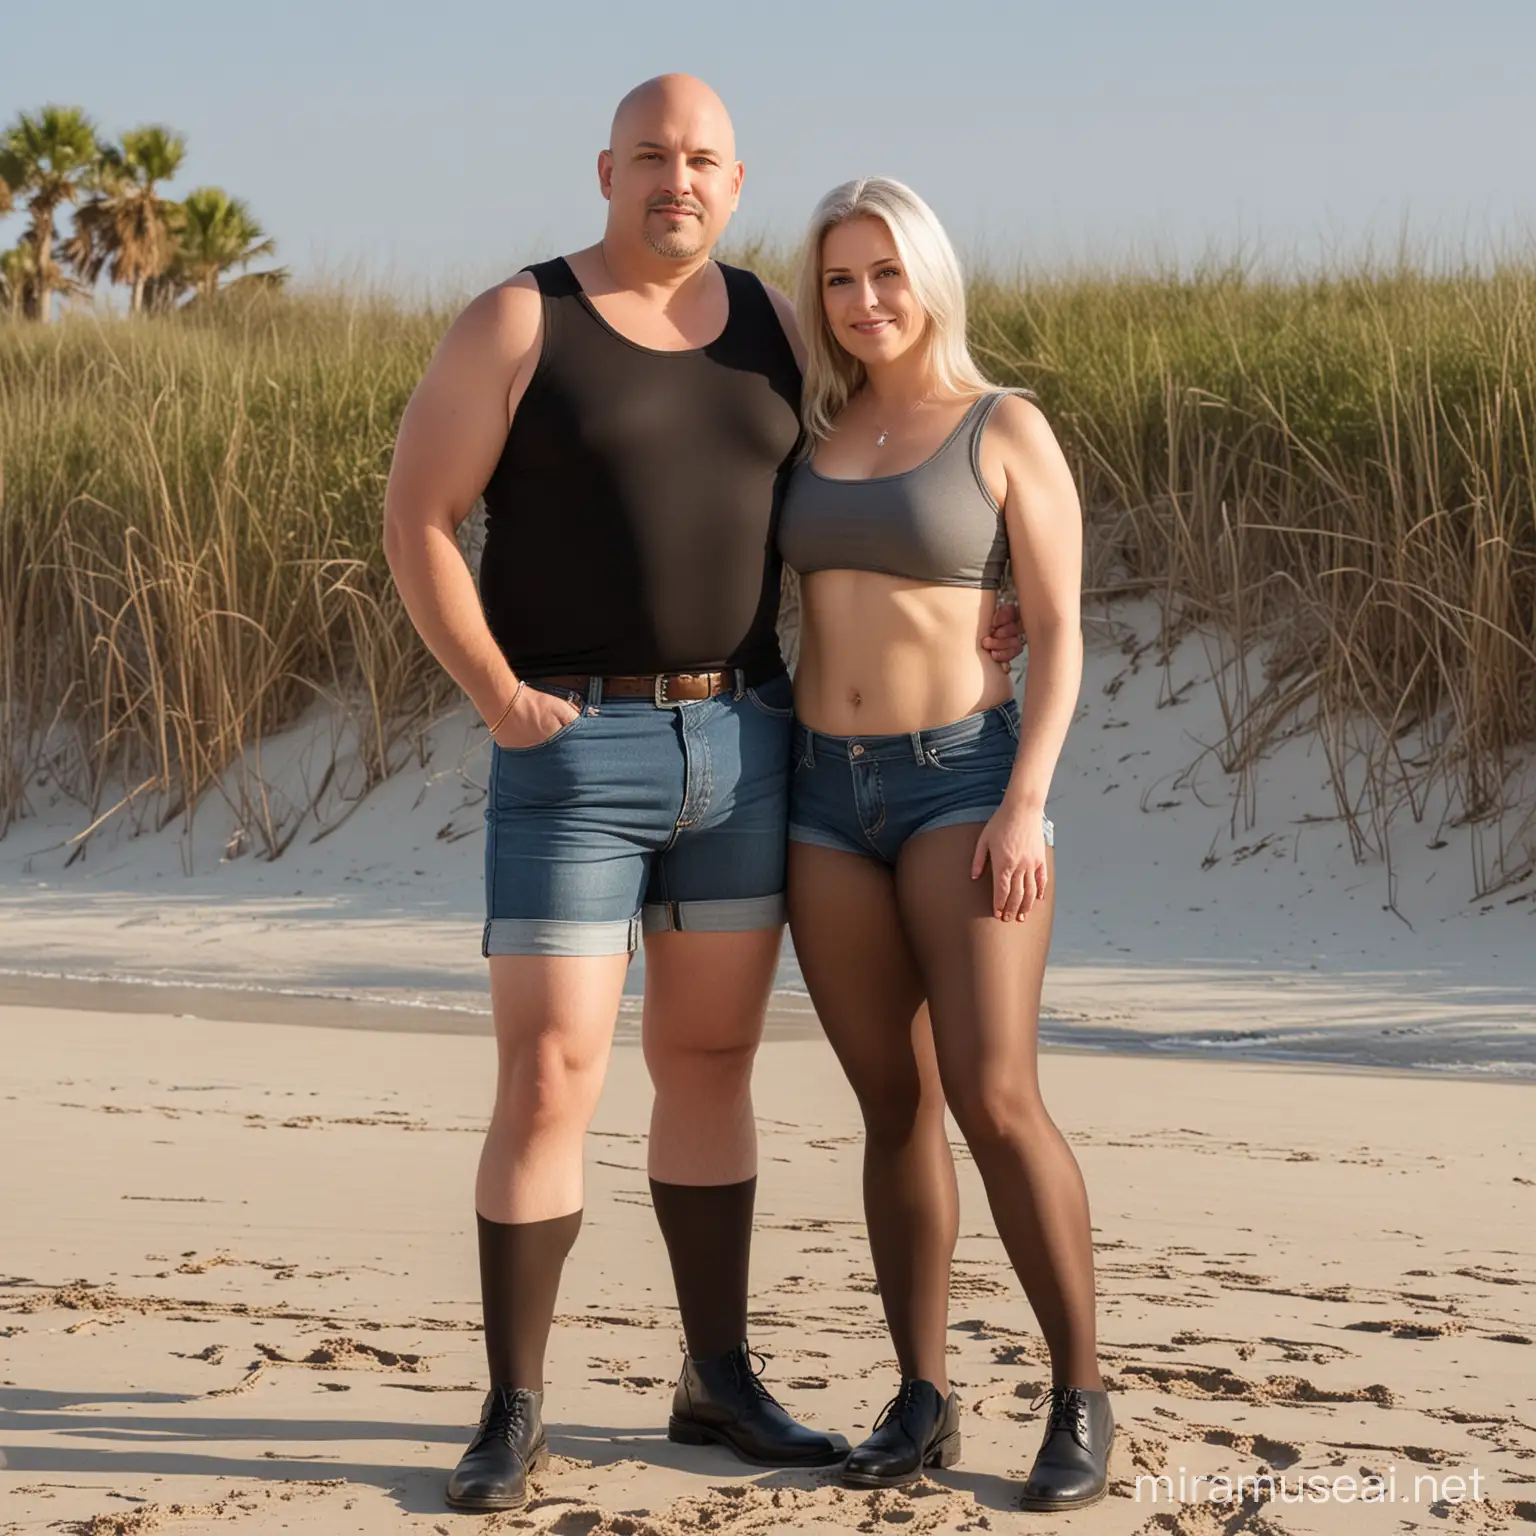 Chubby Husband and Fit Wife Enjoying Sandy Florida Beach in Shiny Pantyhose